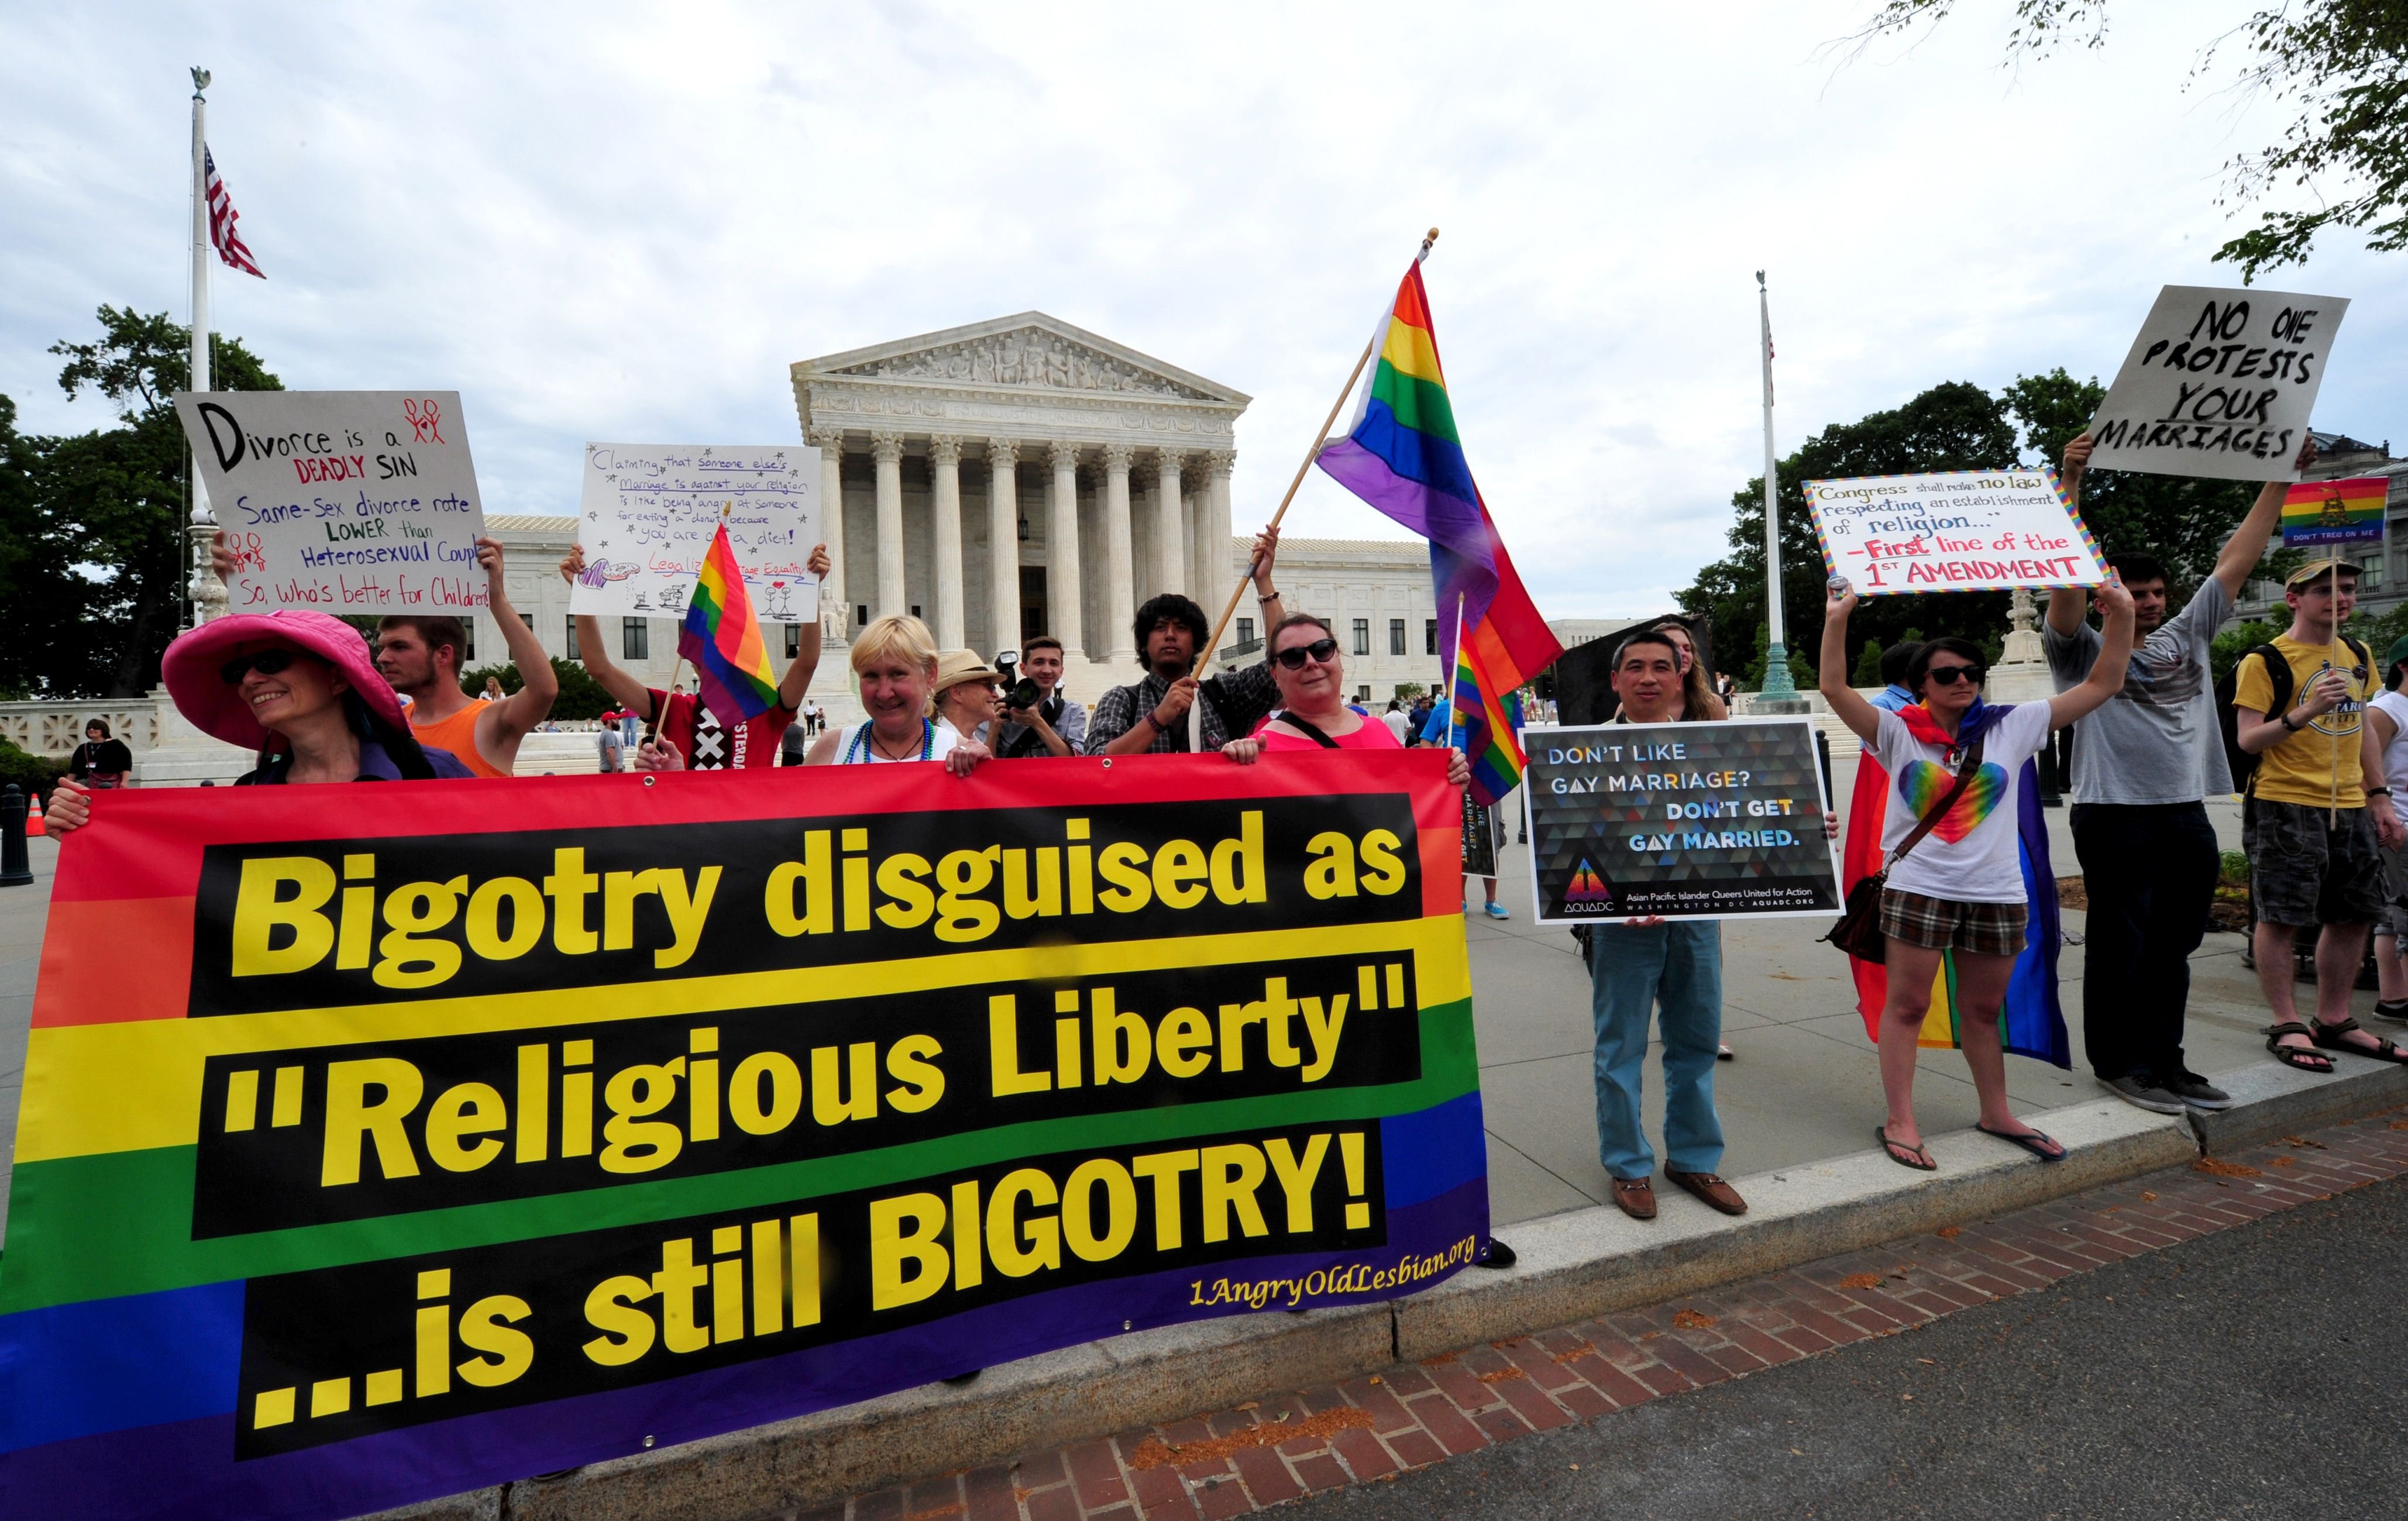 Demonstrators in support of same sex marriage stand during the second annual "March for Marriage" in front of the US Supreme Court in Washington on June 19, 2014. (Karen Bleier—AFP/Getty Images)